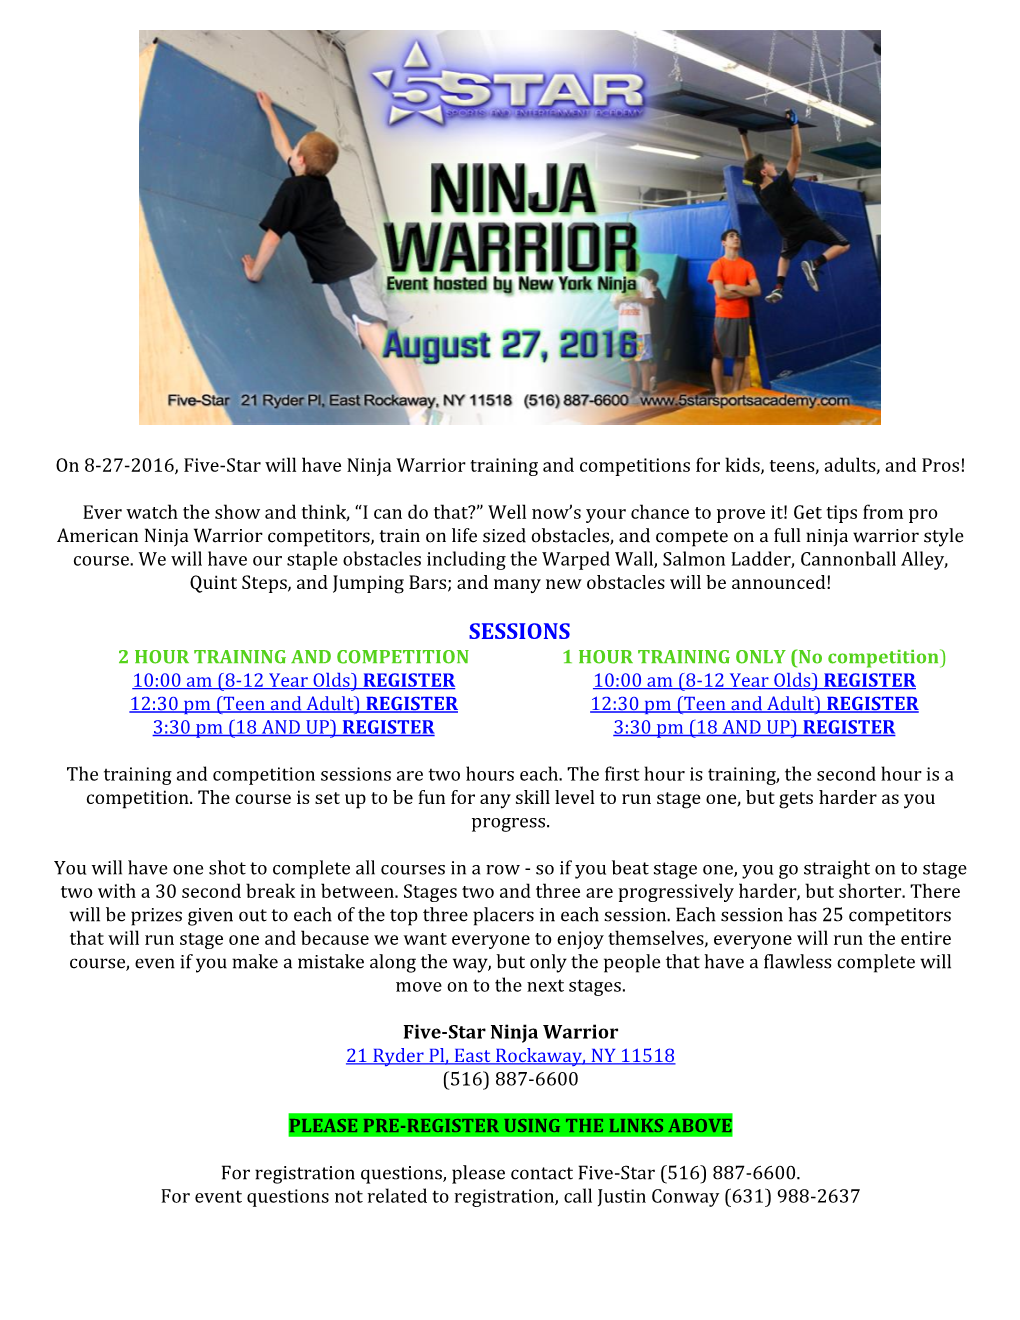 On 8-27-2016, Five-Star Will Have Ninja Warrior Training and Competitions for Kids, Teens, Adults, and Pros!